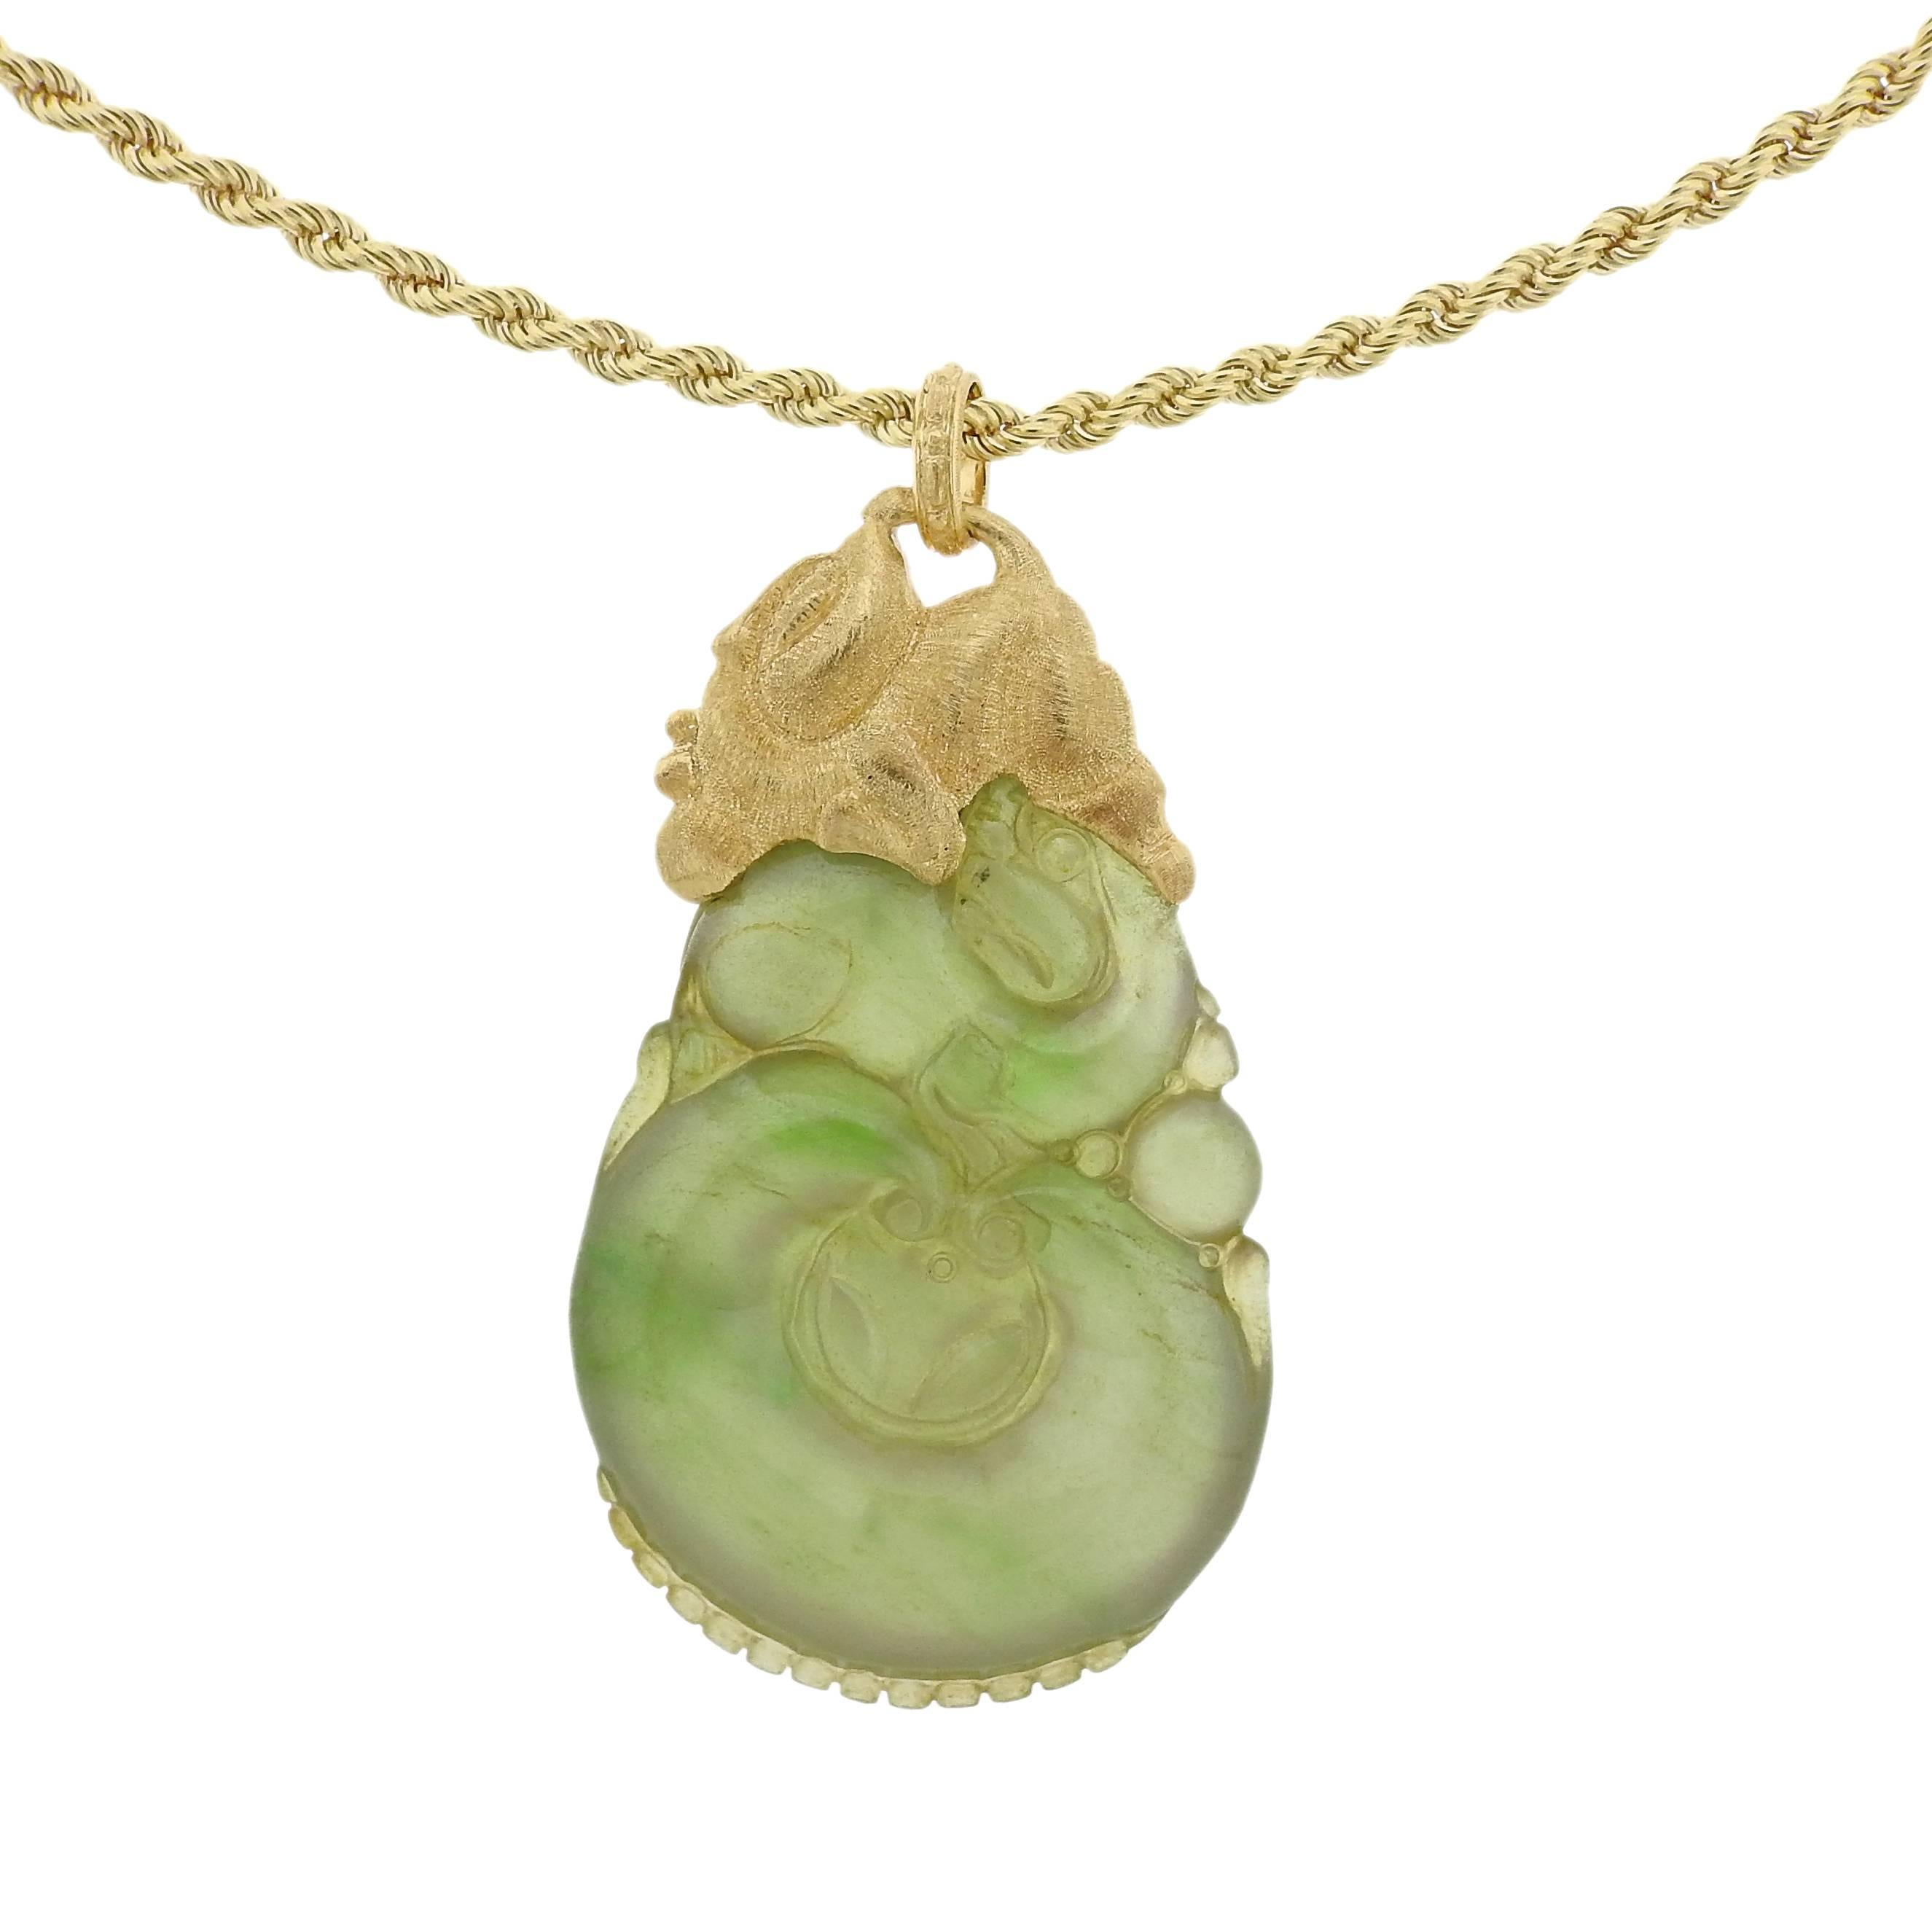 An 18k yellow gold chain necklace, crafted by Buccellati, featuring large carved jade pendant.  Necklace is 25 inches long, Pendant - 68mm x 35mm. Marked: Buccellati, Italy, 18k, S6102. Weight - 80 grams.
Retail $32300.